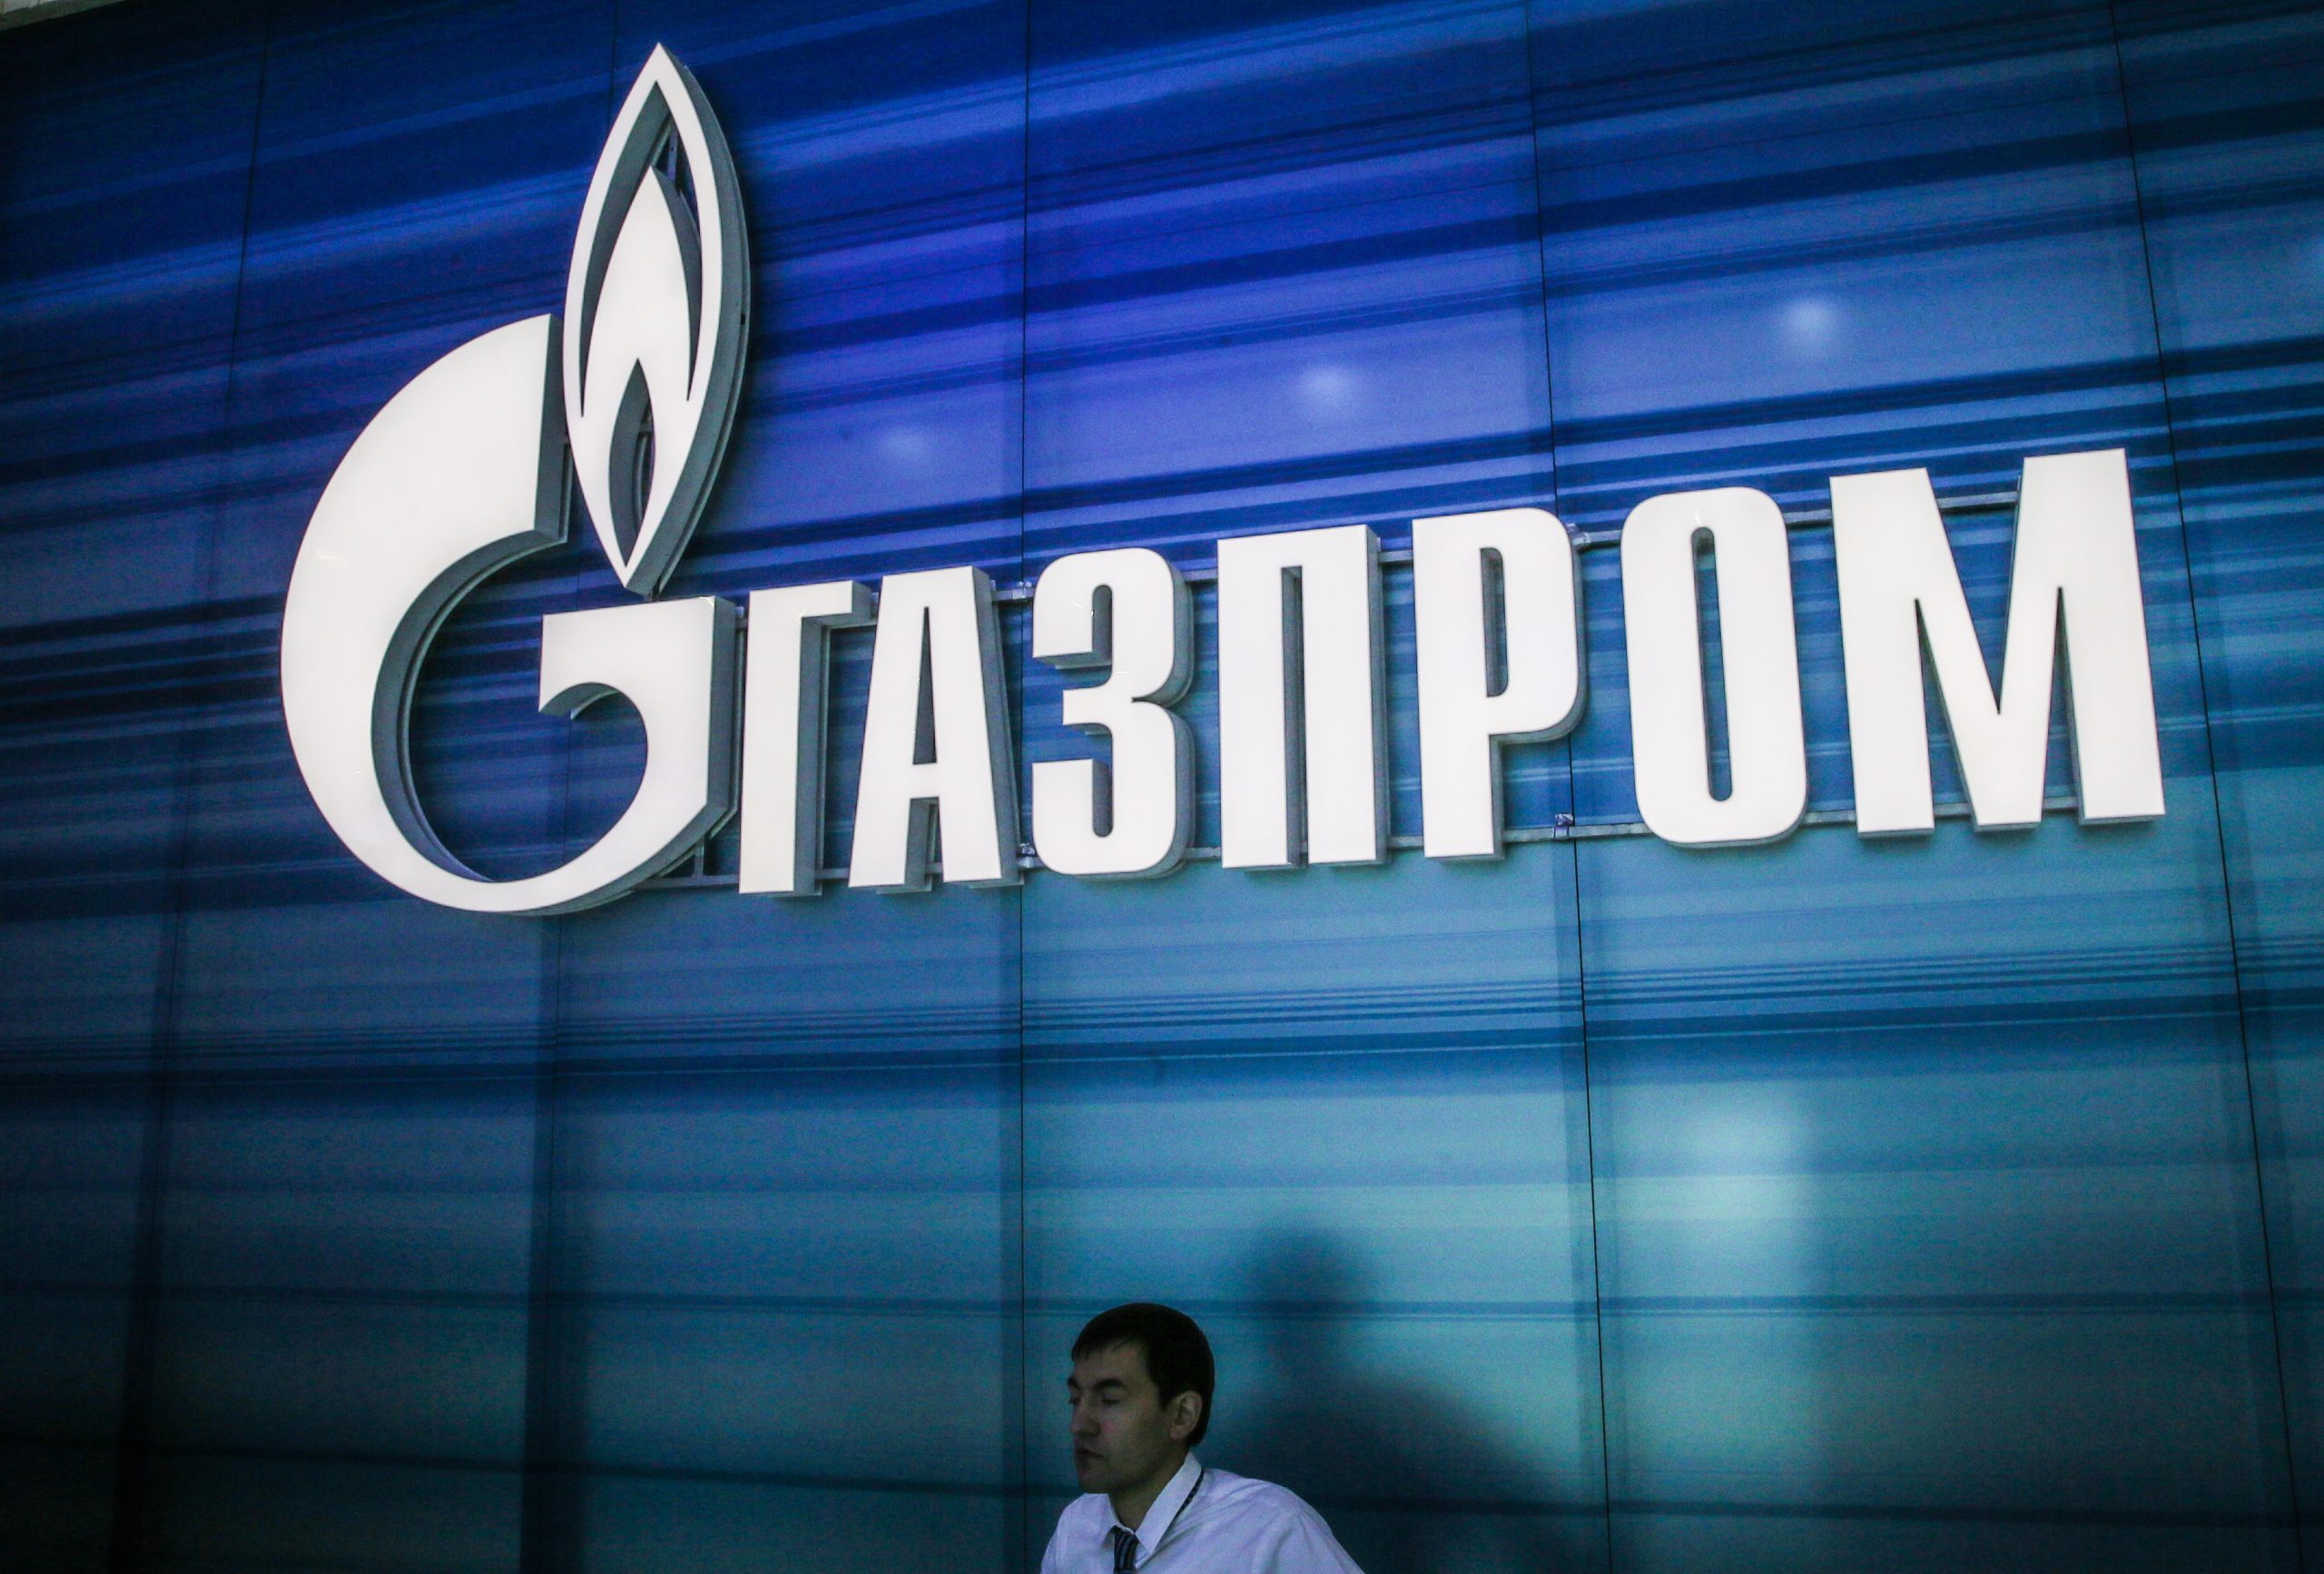 epa08084819 (FILE) - A view of the exhibition stand of the Russian Gazprom company during the 21st World Petroleum Congress (WPC) in Moscow, Russia, 16 June 2014 (reissued 21 December 2019). Reports on 21 December 2019 state Russian energy company  Gazprom and Ukrainian authorities have reached an agreement whereby Gazprom is to pay Ukraine 2.9 billion USD as a settlement in a row over gas transit. The new agreement for the next five years also sees a reduction of Russian gas flowing through Ukraine from 90 billion qubic meters to 65 billion qubic meters in 2020, and a further reduction to 40 billion qubic meters planned for the years 2021-2024.  EPA/SERGEI ILNITSKY *** Local Caption *** 51422768